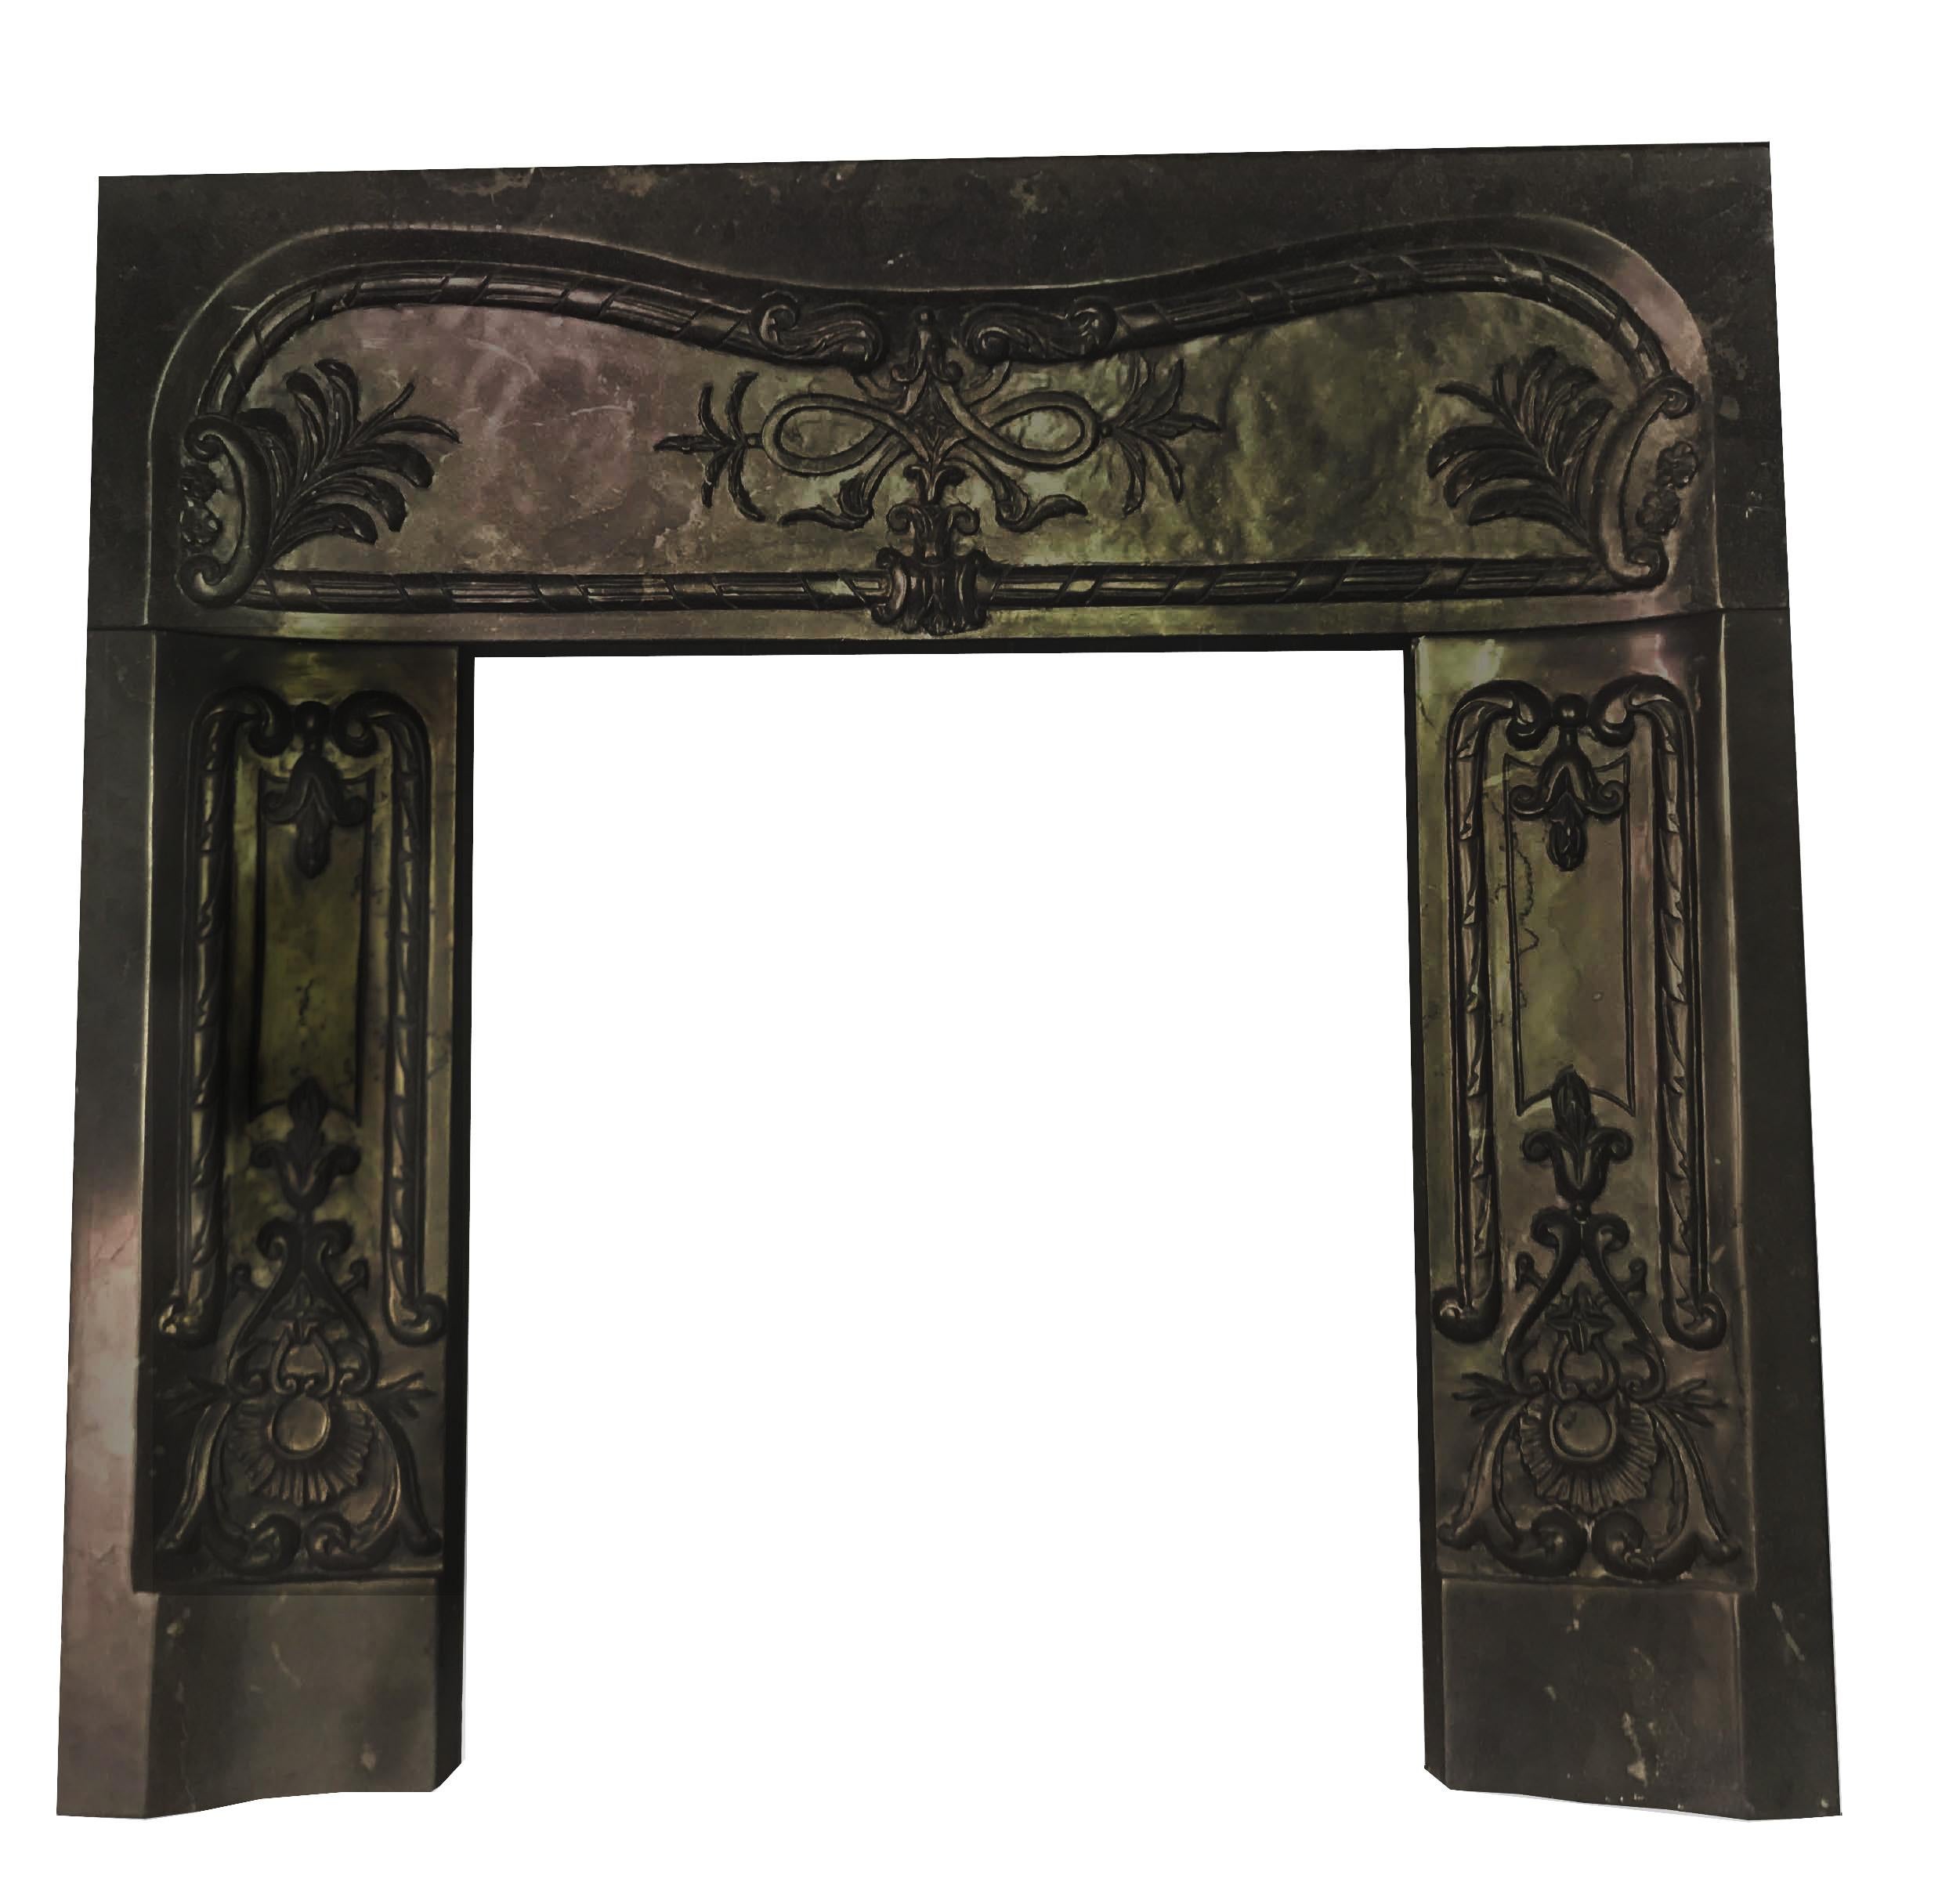 Marble 19th century fireplace mantel in black absolute marble with carved decorative details. Mantel (fireplace) comes in three pieces. Measures: Legs are H 26